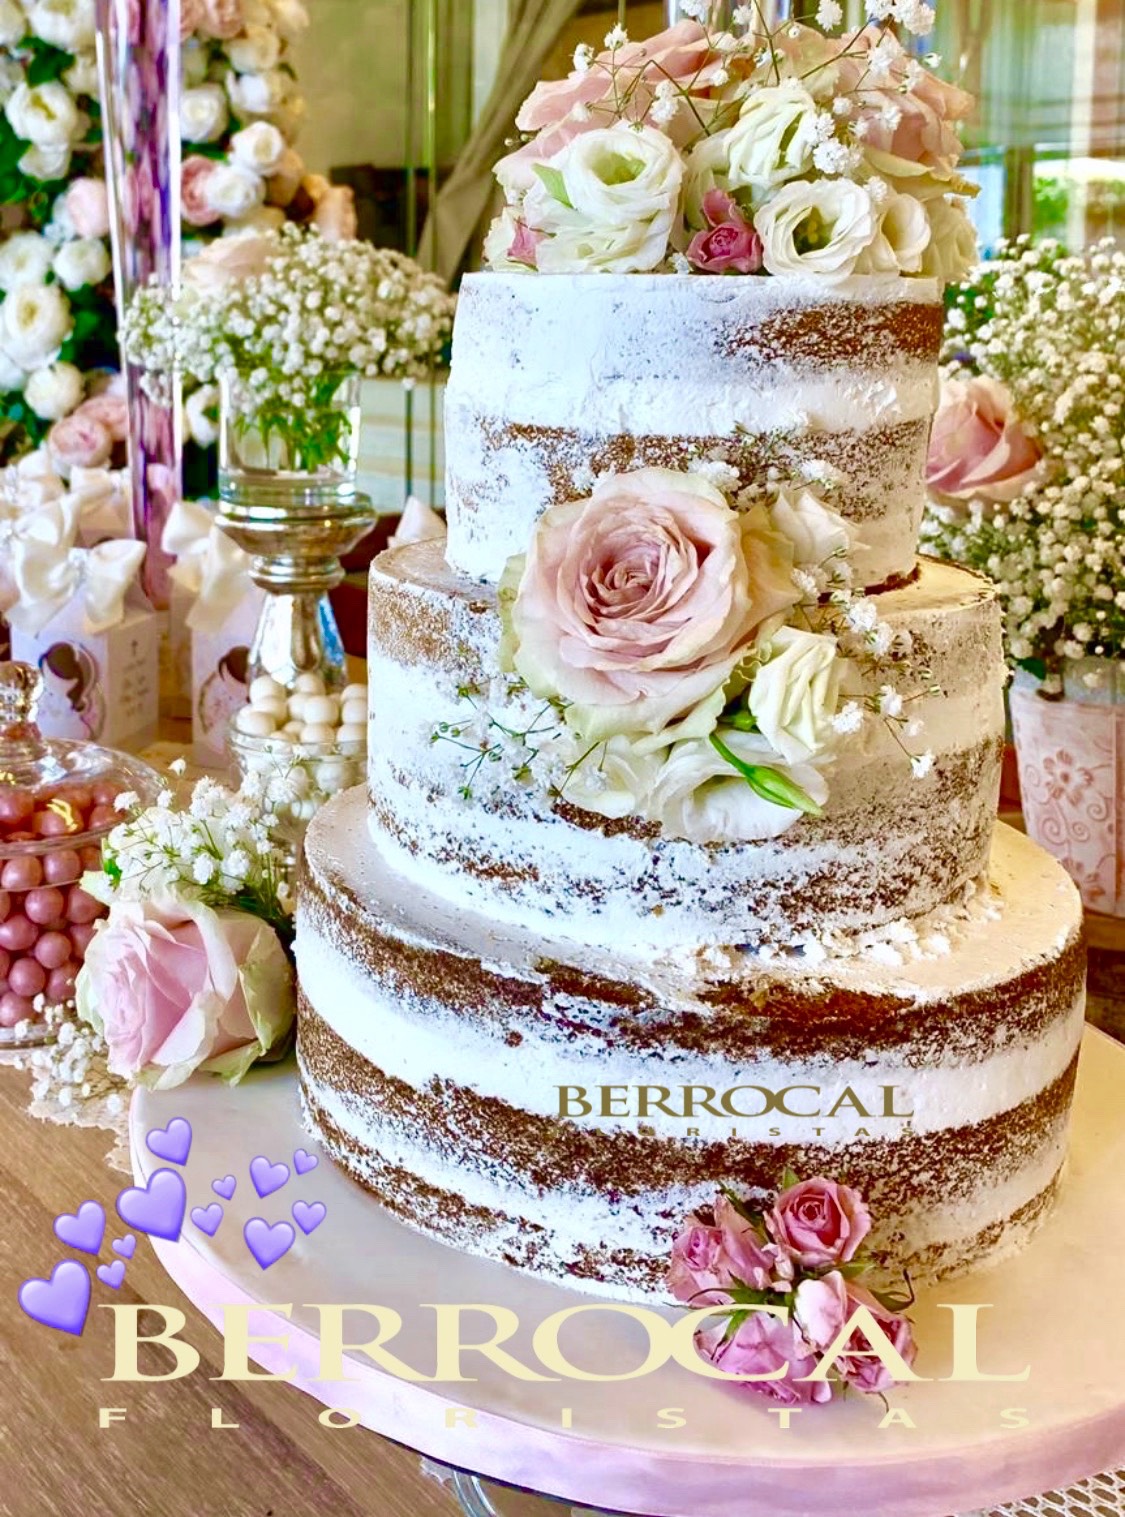 Cake decorated with white flowers. Roses and Lisianthus.